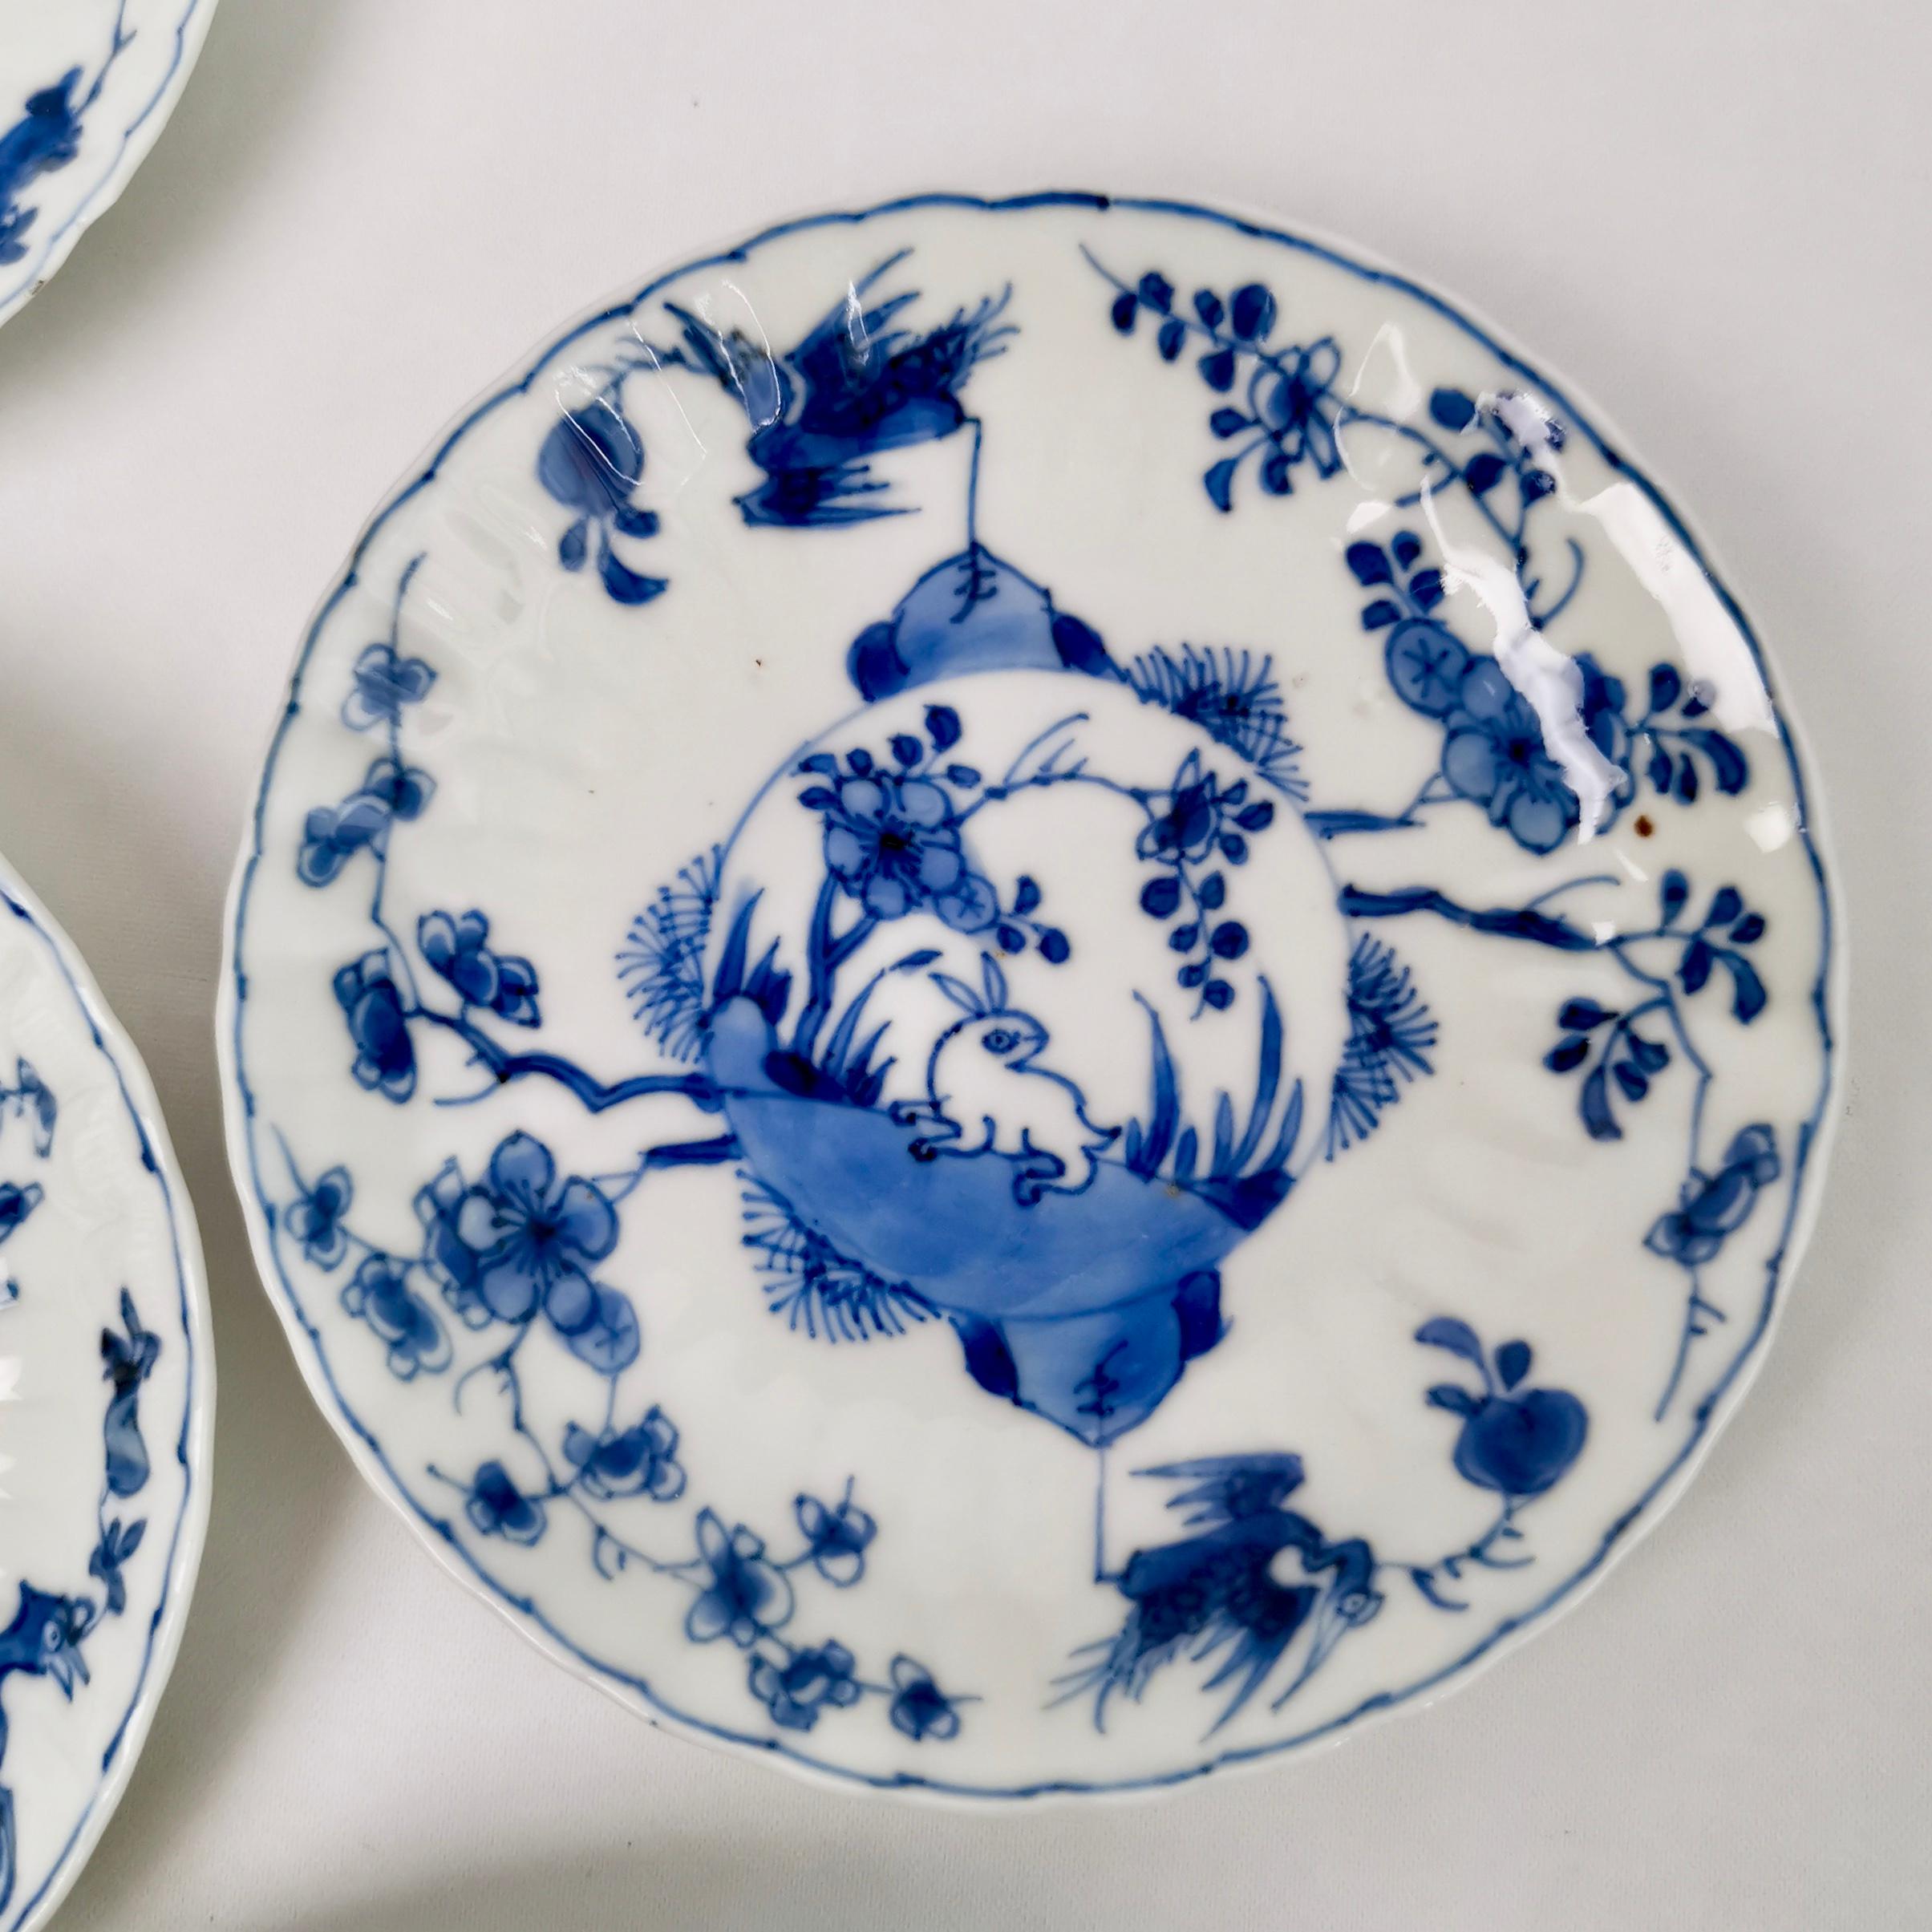 Set of Chinese Export Tea Bowls, Rabbits and Cranes, 19th Century Kraak Style 4